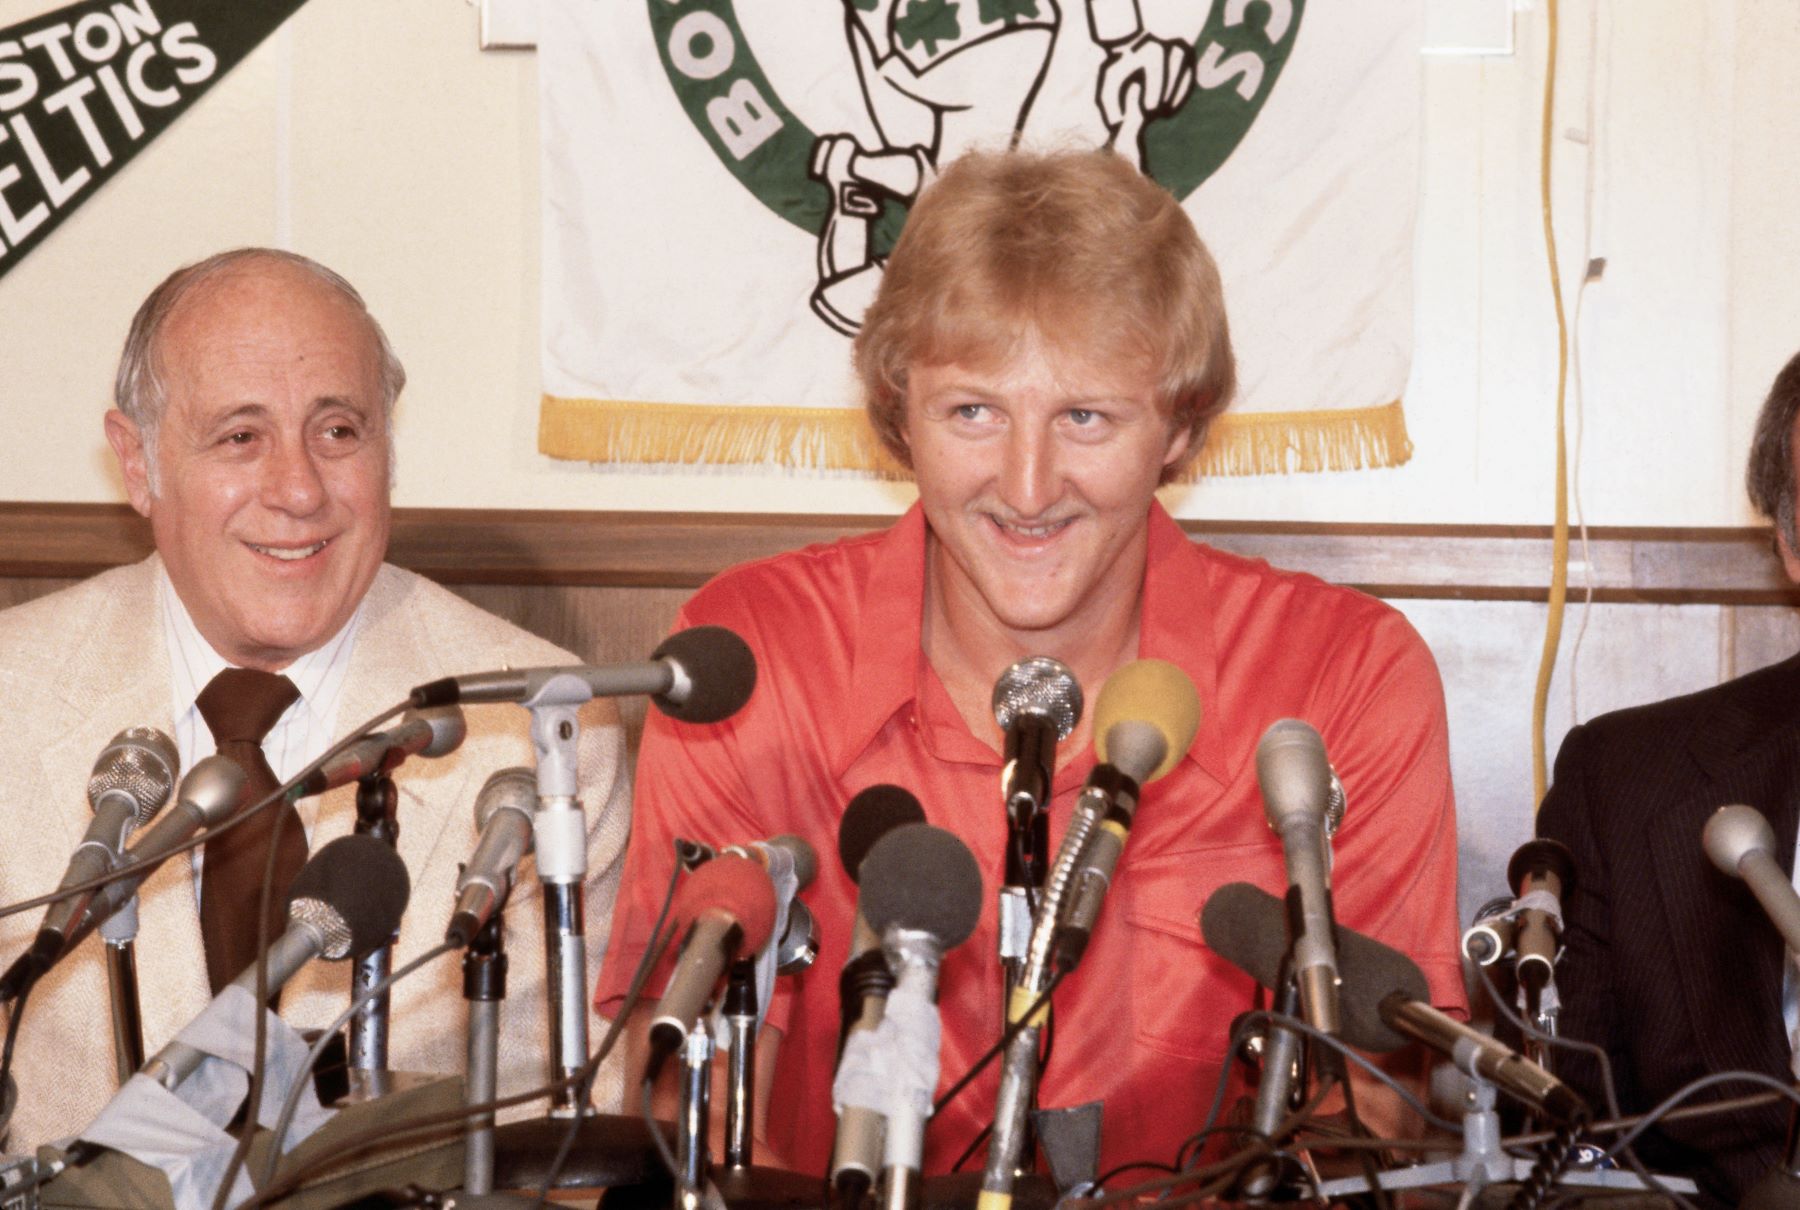 Larry Bird Abandoned Professional Basketball and Dropped out of College After Just 24 Days Due to Homesickness